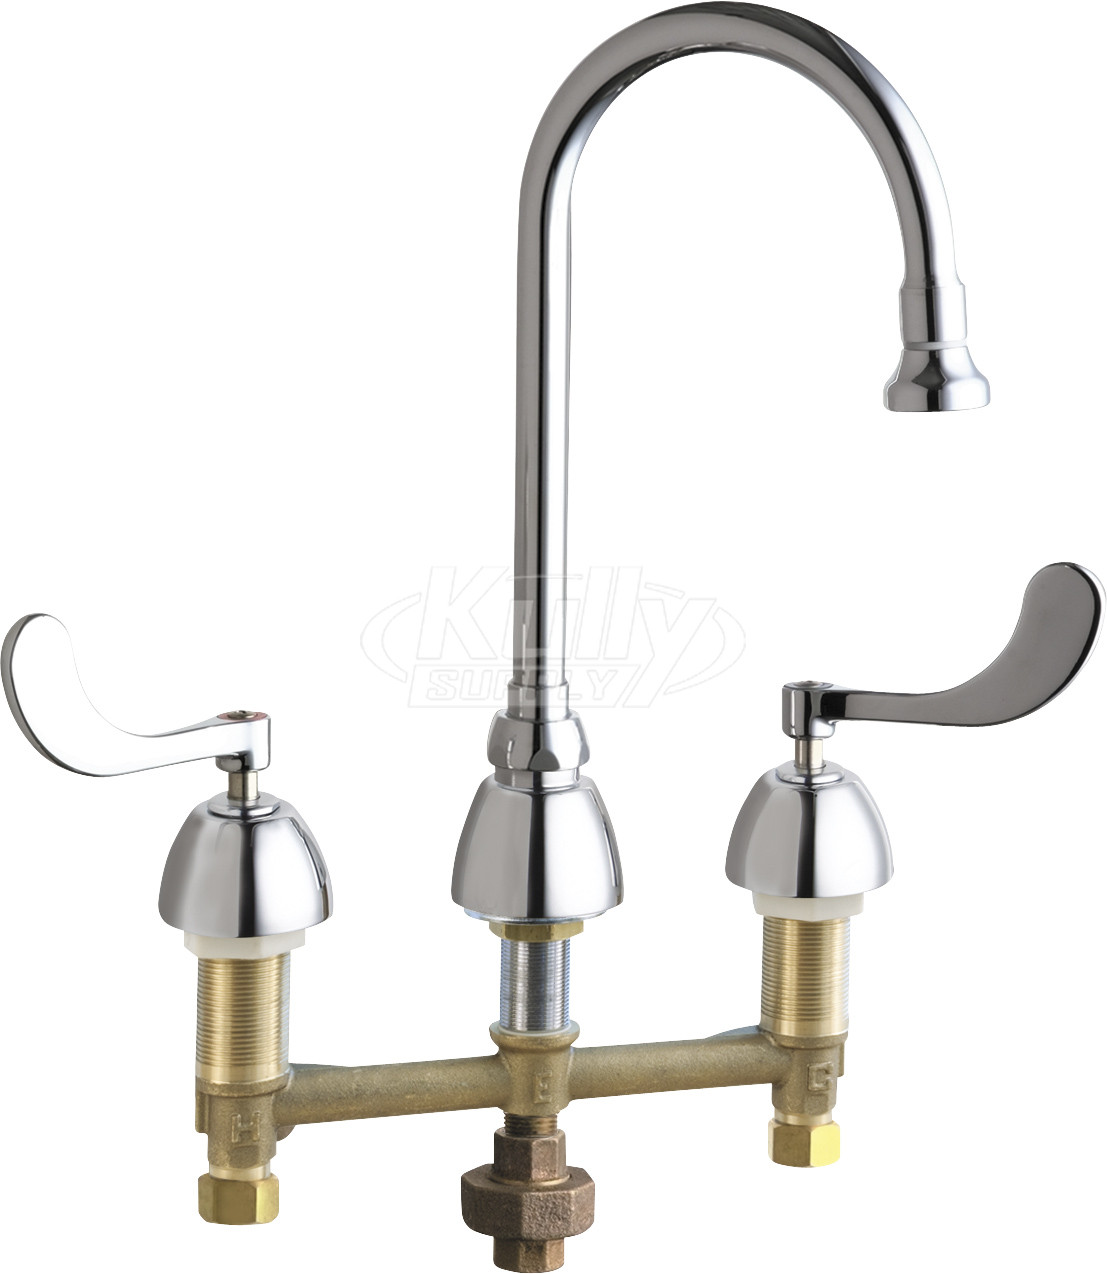 Chicago 786-TWABCP Concealed Hot and Cold Water Sink Faucet with Third Water Inlet